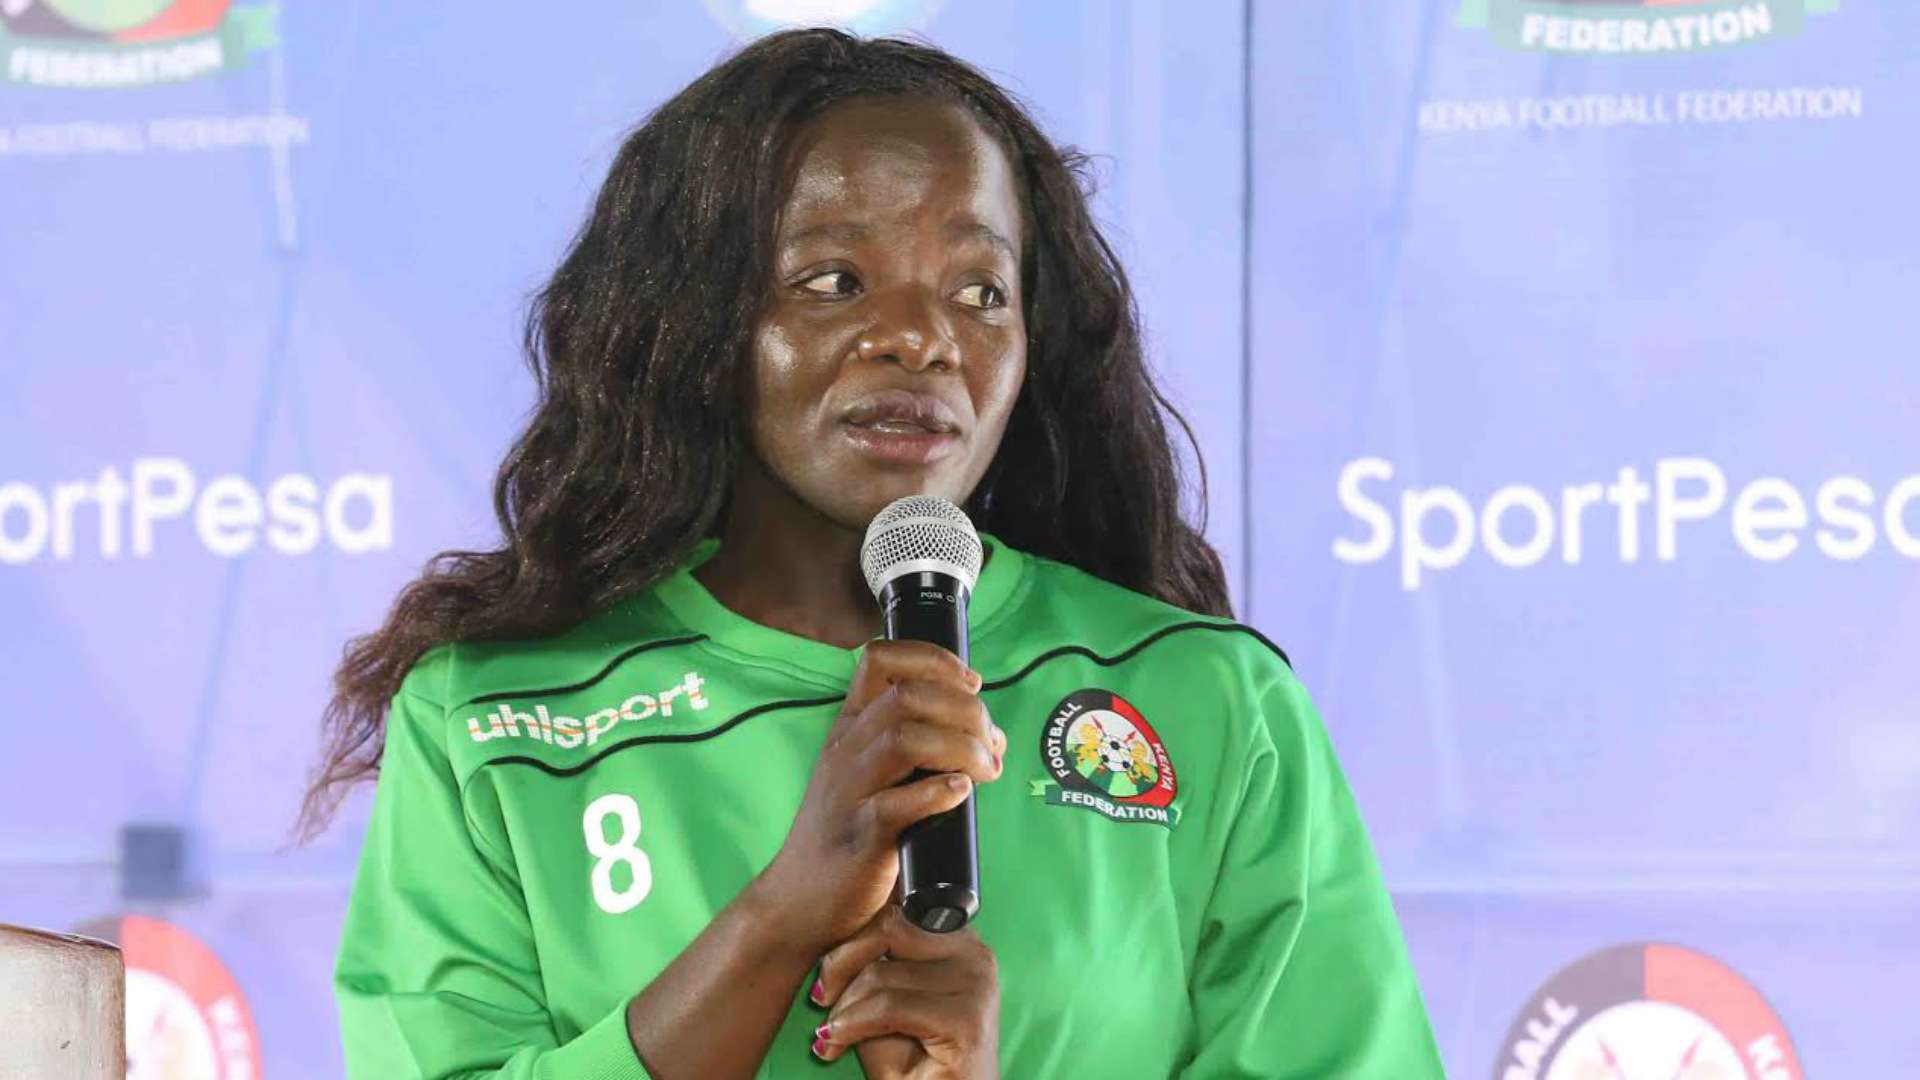 Harambee Starlets captain assures Kenyans of a good showing in the Awcon final